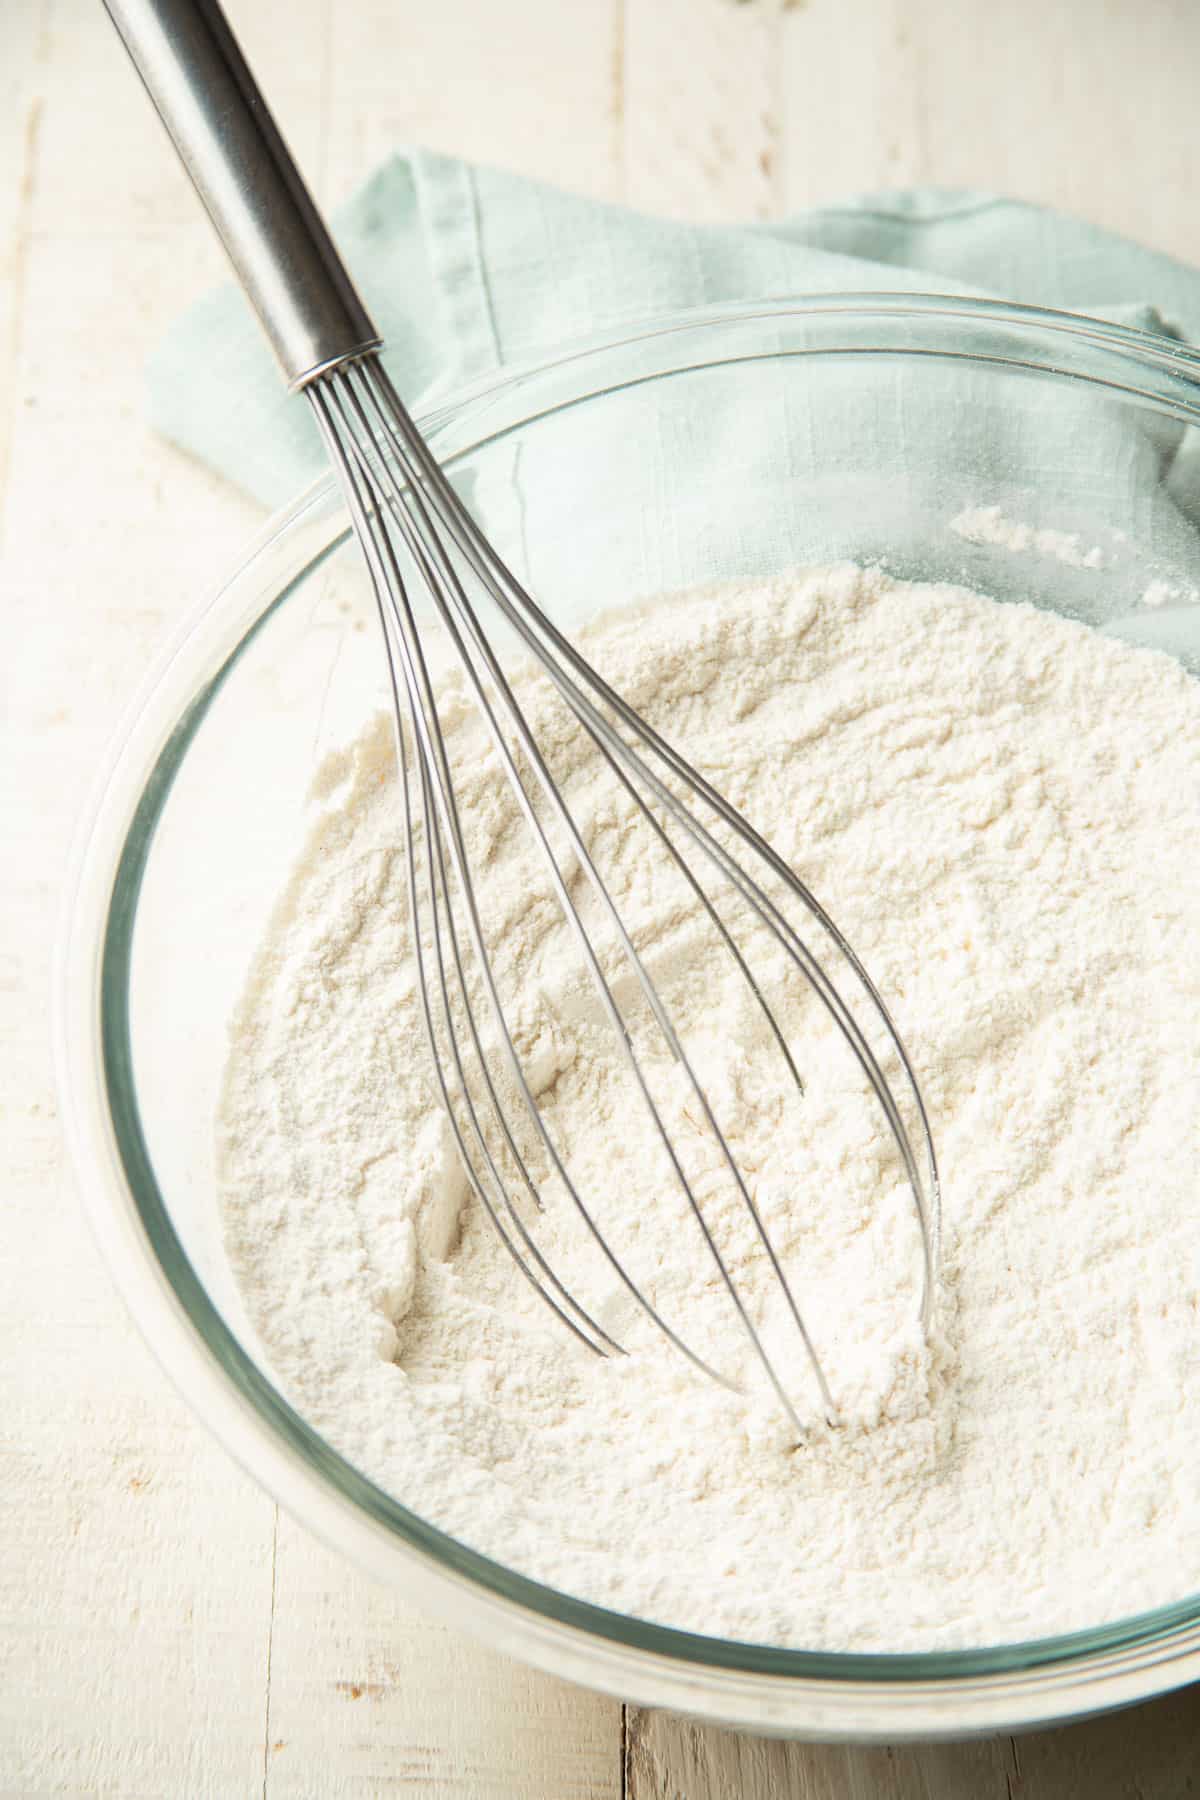 Dry ingredients in a mixing bowl with whisk.